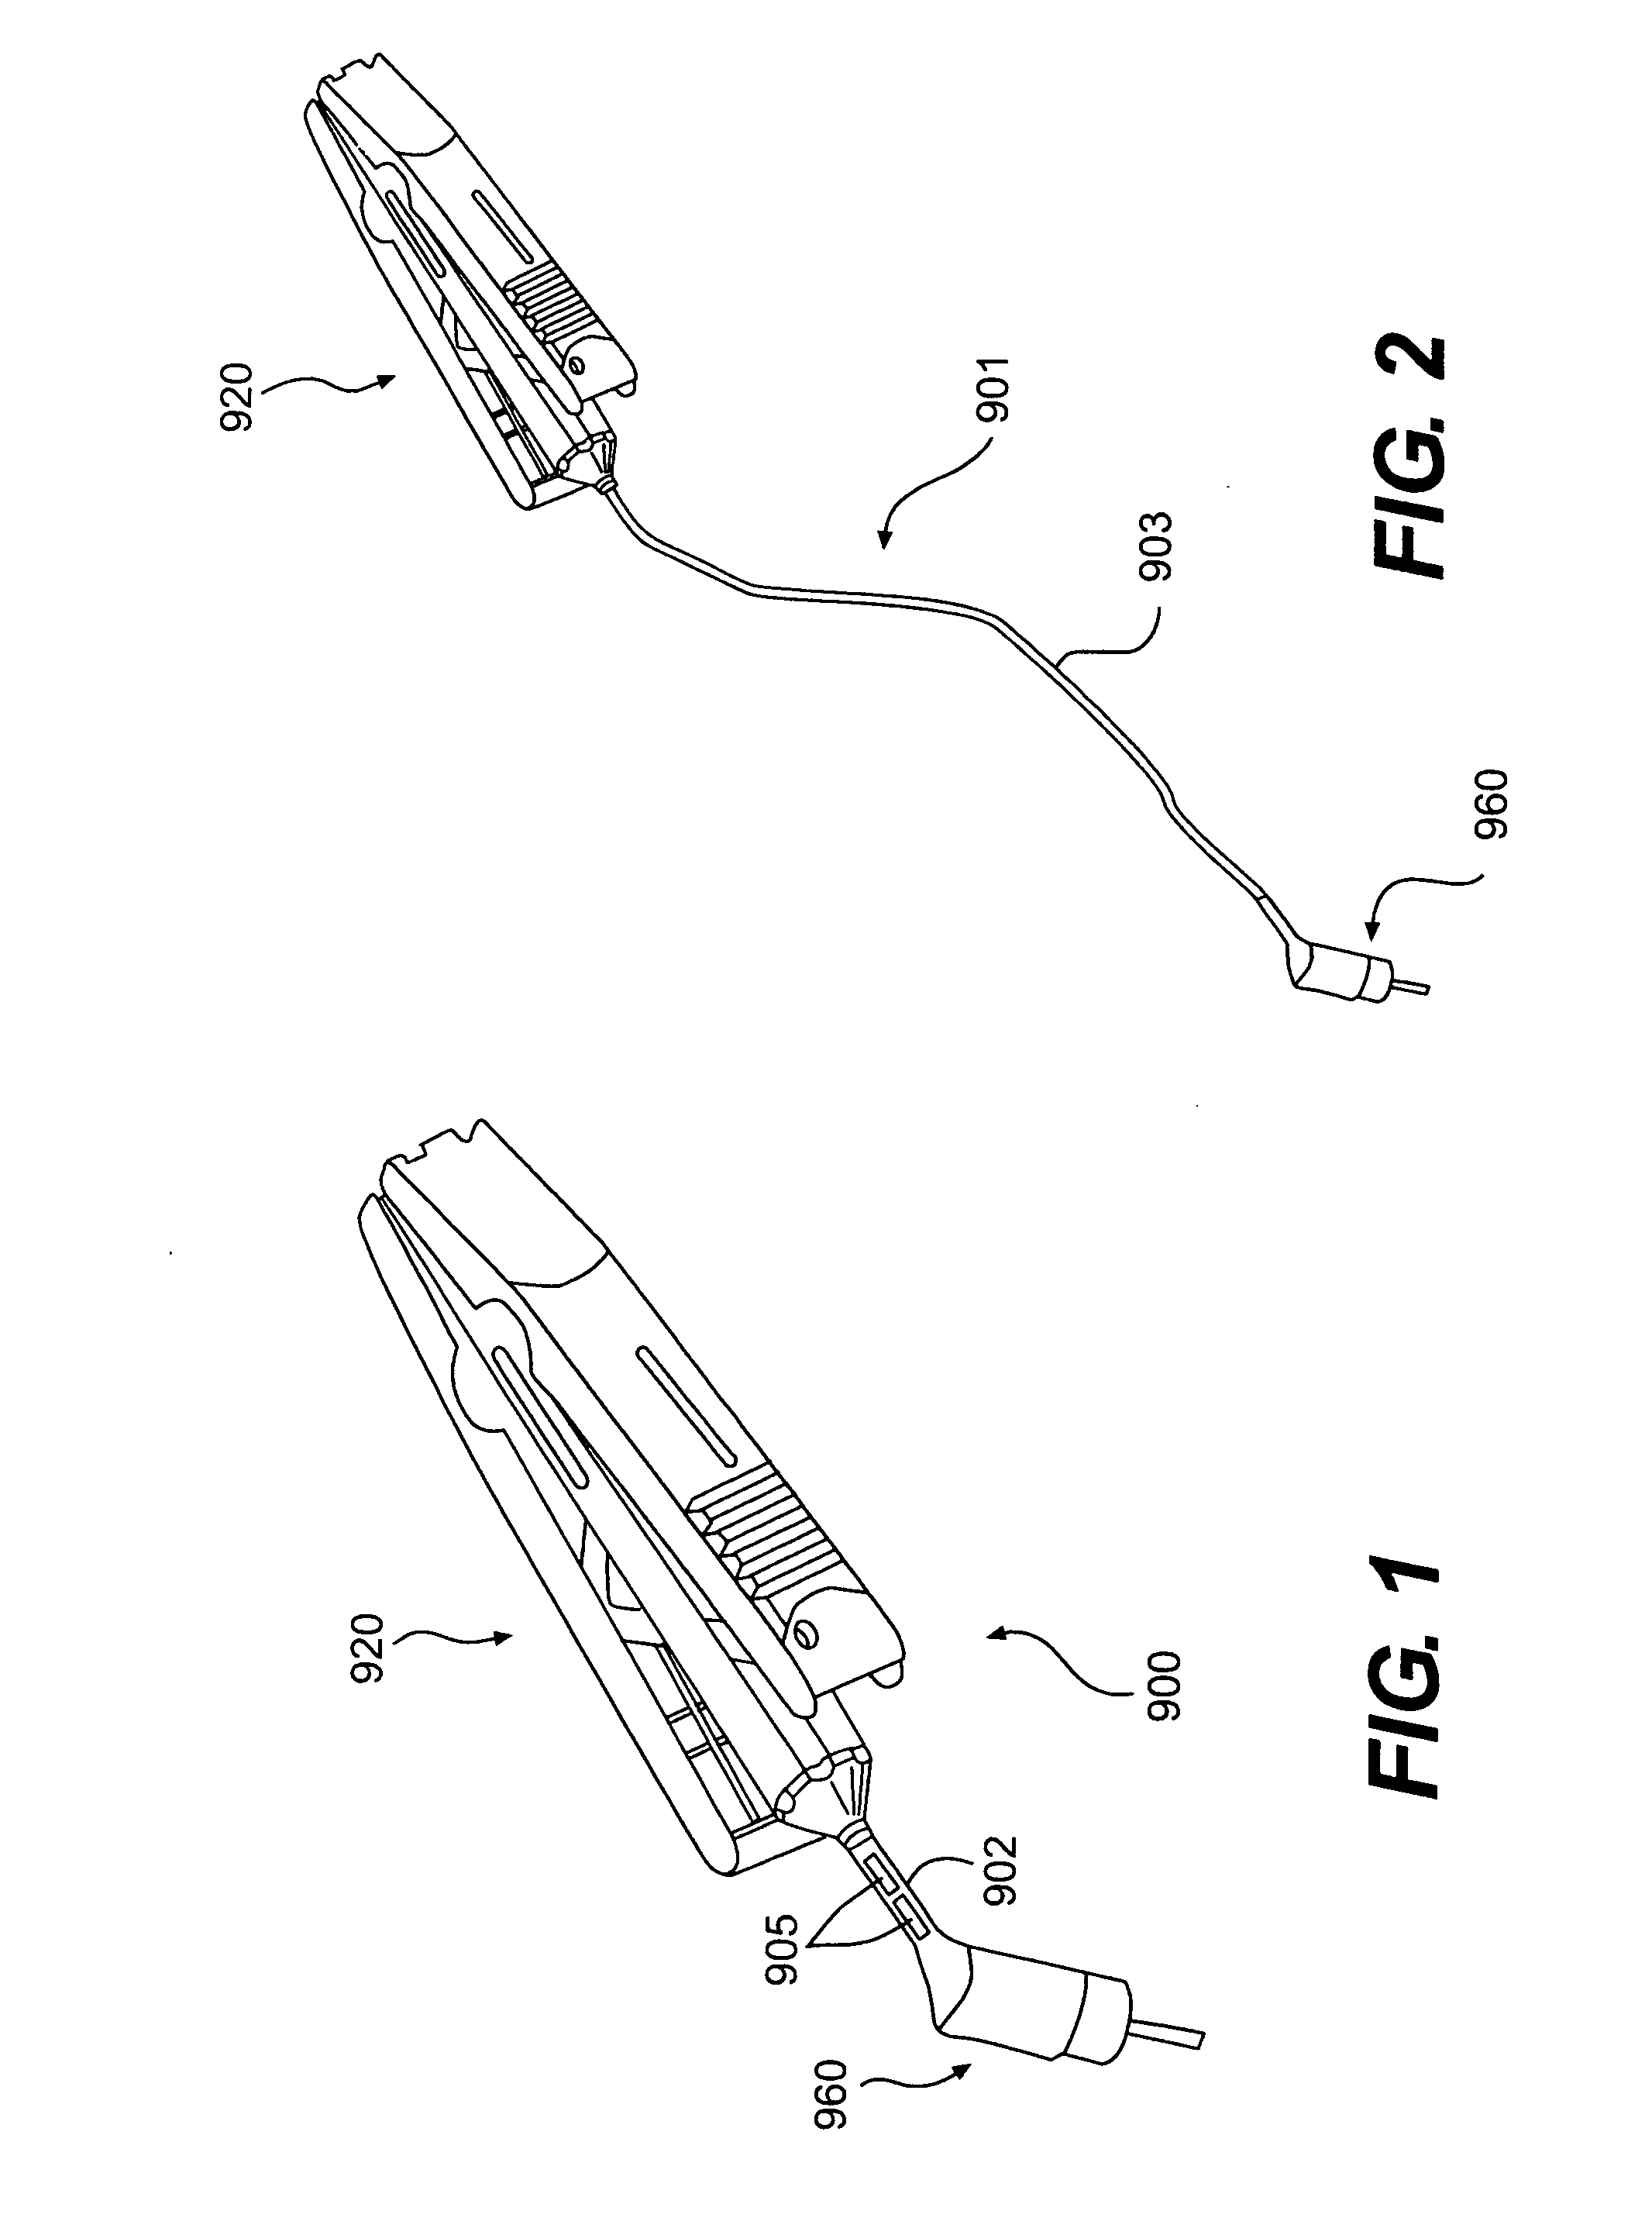 Method for performing a coronary artery bypass graft procedure